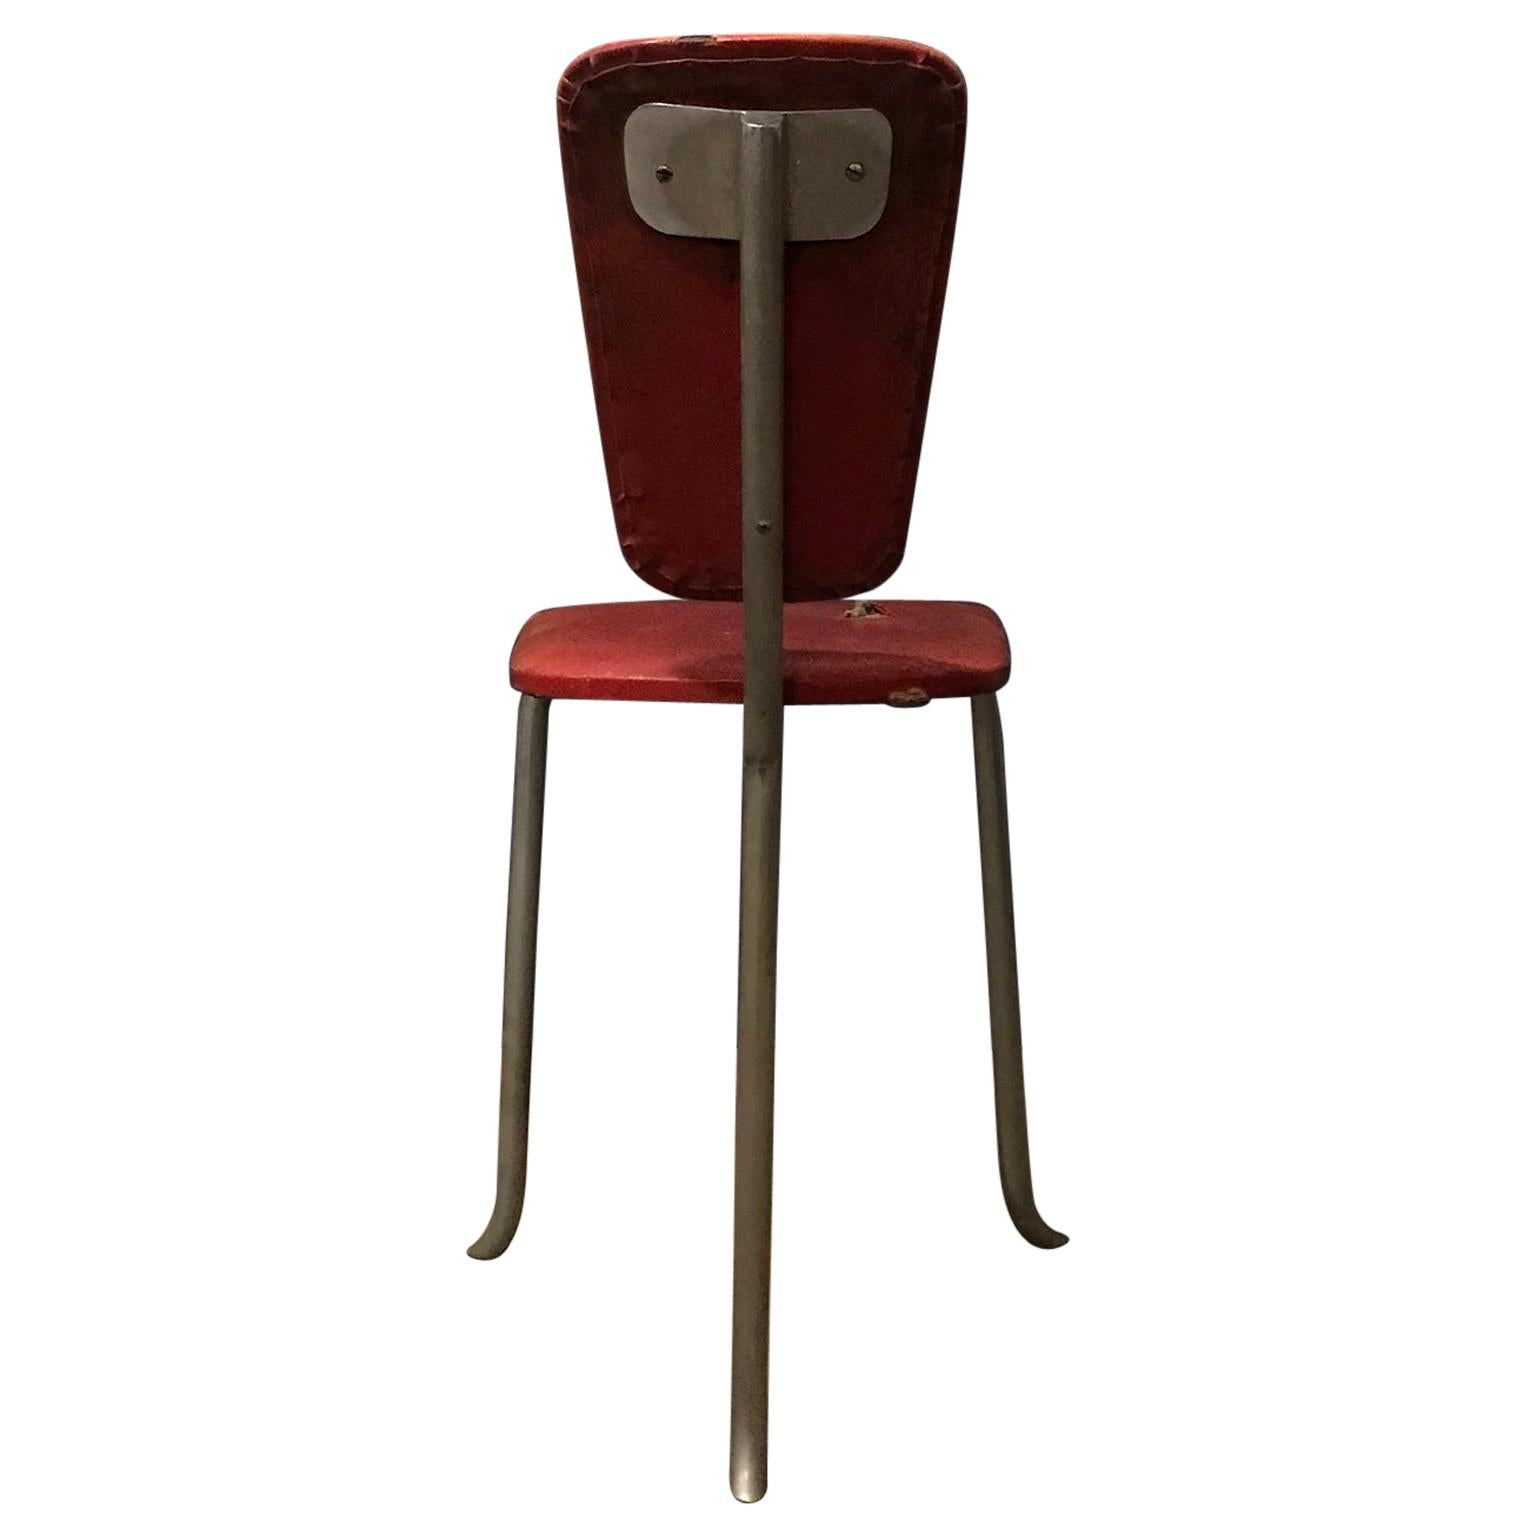 Rare 1960s Tripod Side Chair in Original Red Leatherette For Sale